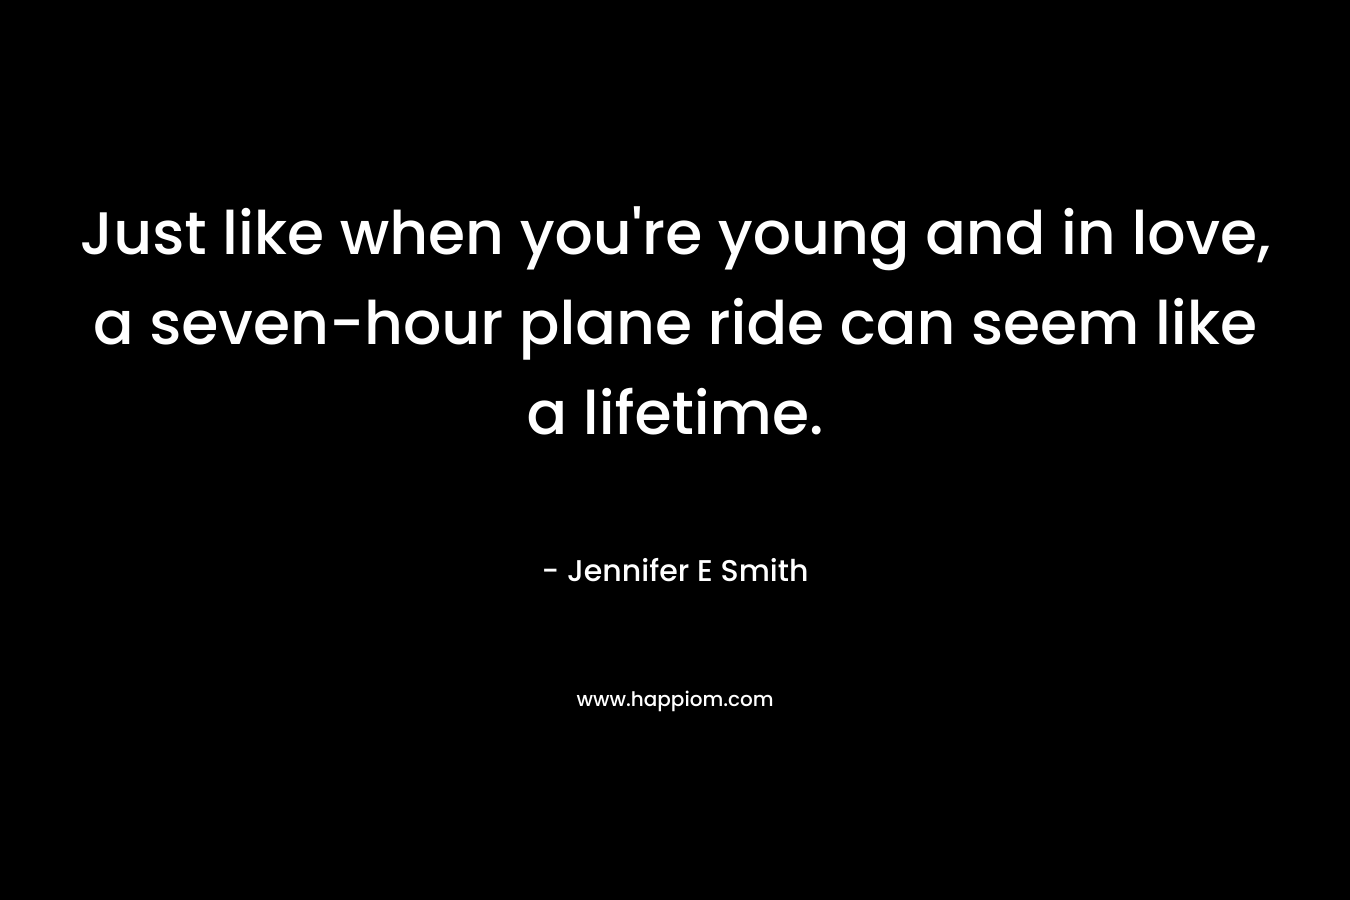 Just like when you’re young and in love, a seven-hour plane ride can seem like a lifetime. – Jennifer E Smith